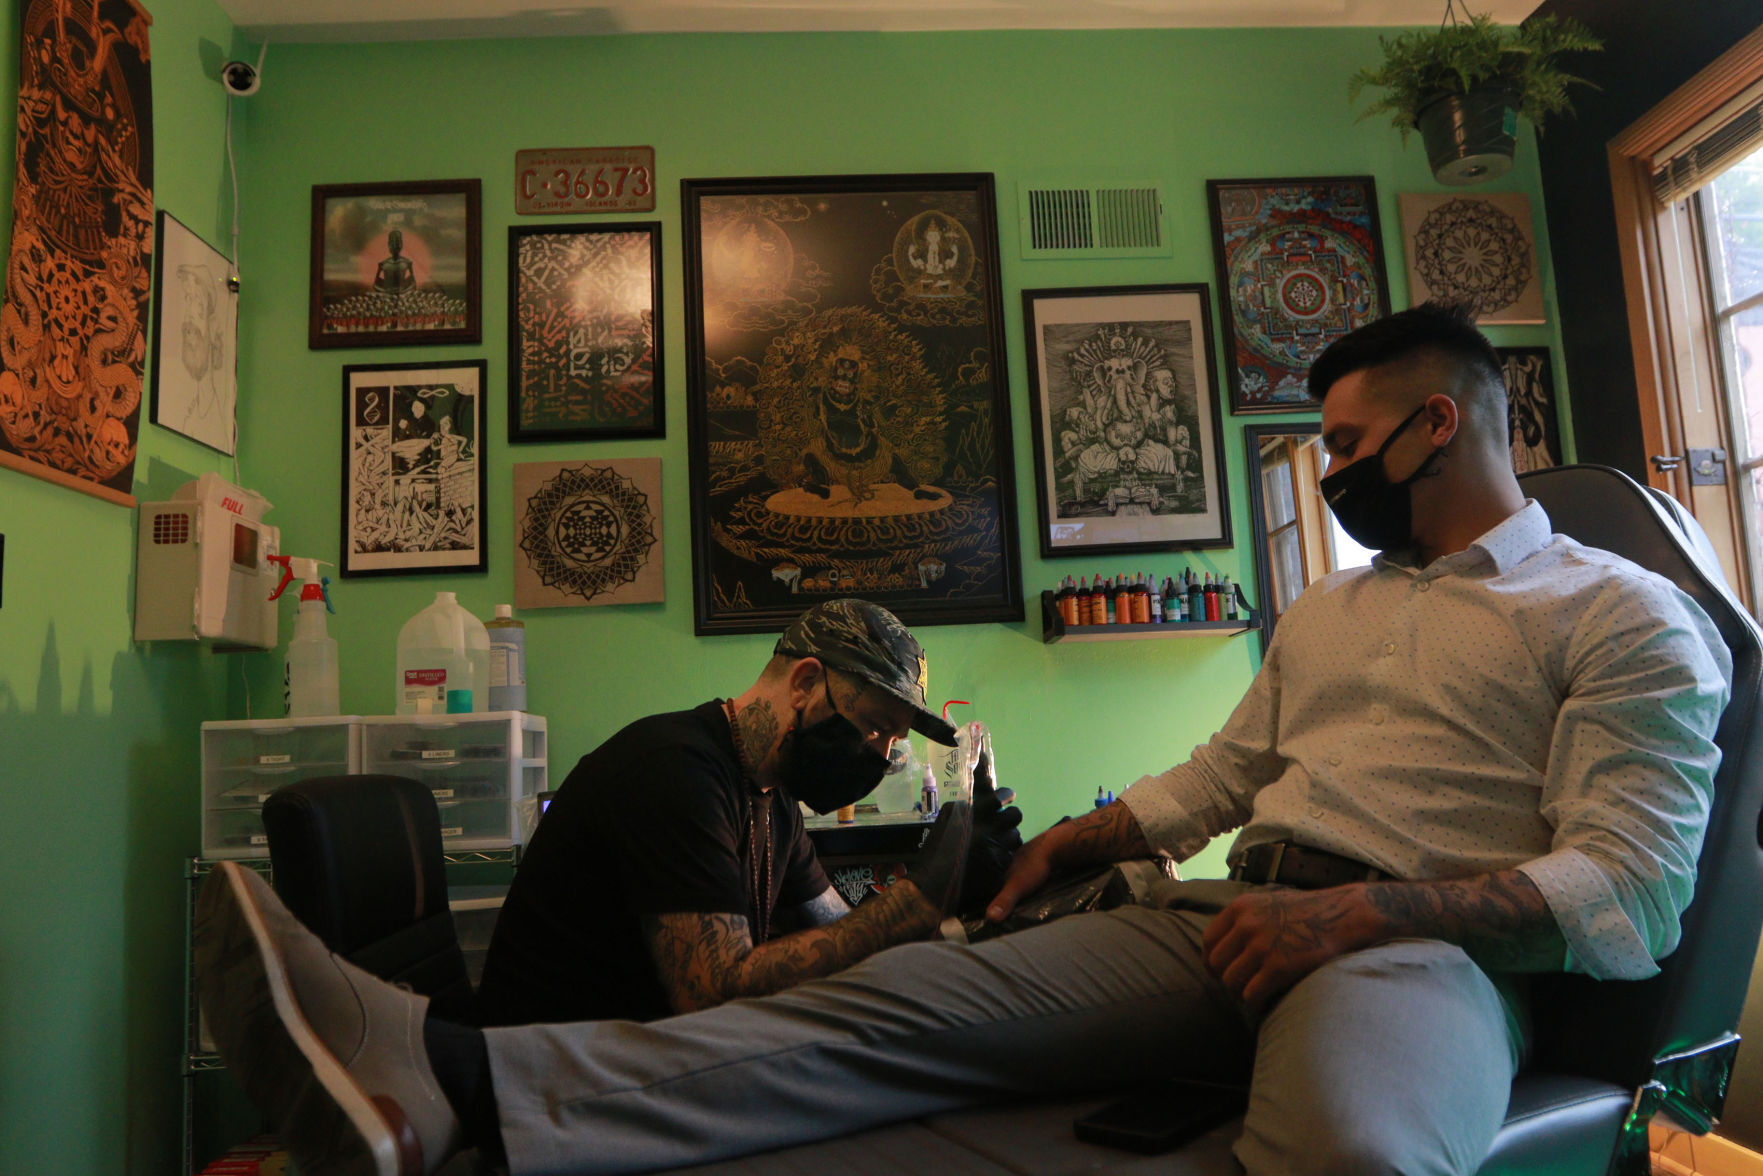 Ben Johnson, co-owner of Emerald Buddha Tattoo, gives a tattoo to Stephen Grisez, of Plattville, Wis., at the Galena, Ill., tattoo shop on Thursday, May 27, 2021.    PHOTO CREDIT: Katie Goodale